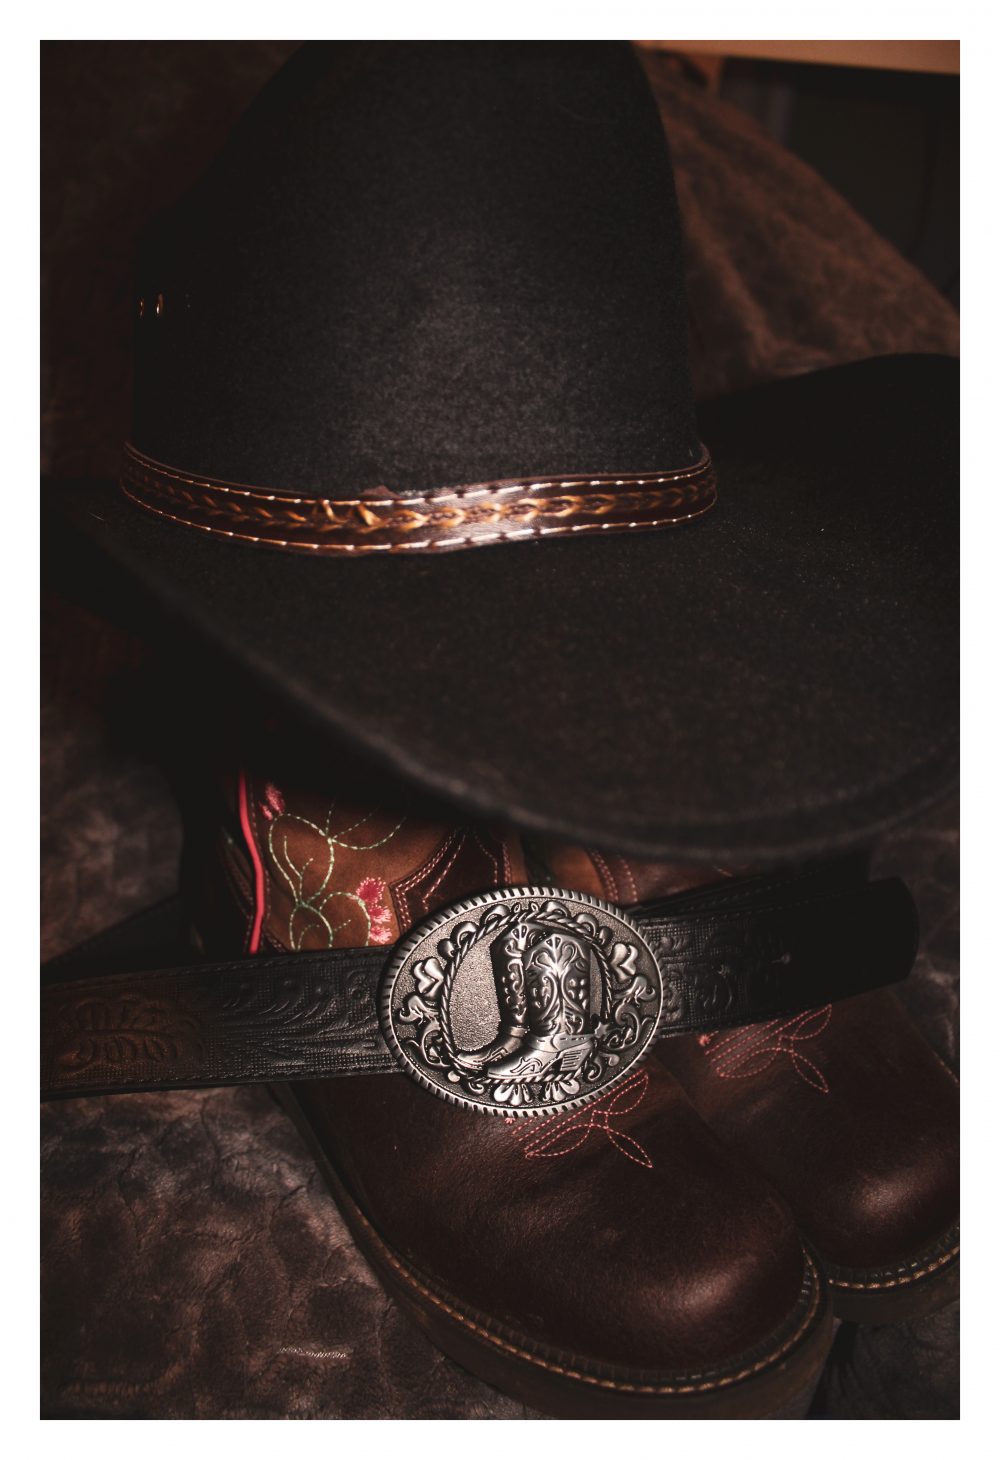 The image is of my hat, boots and belt which are all brown and black.